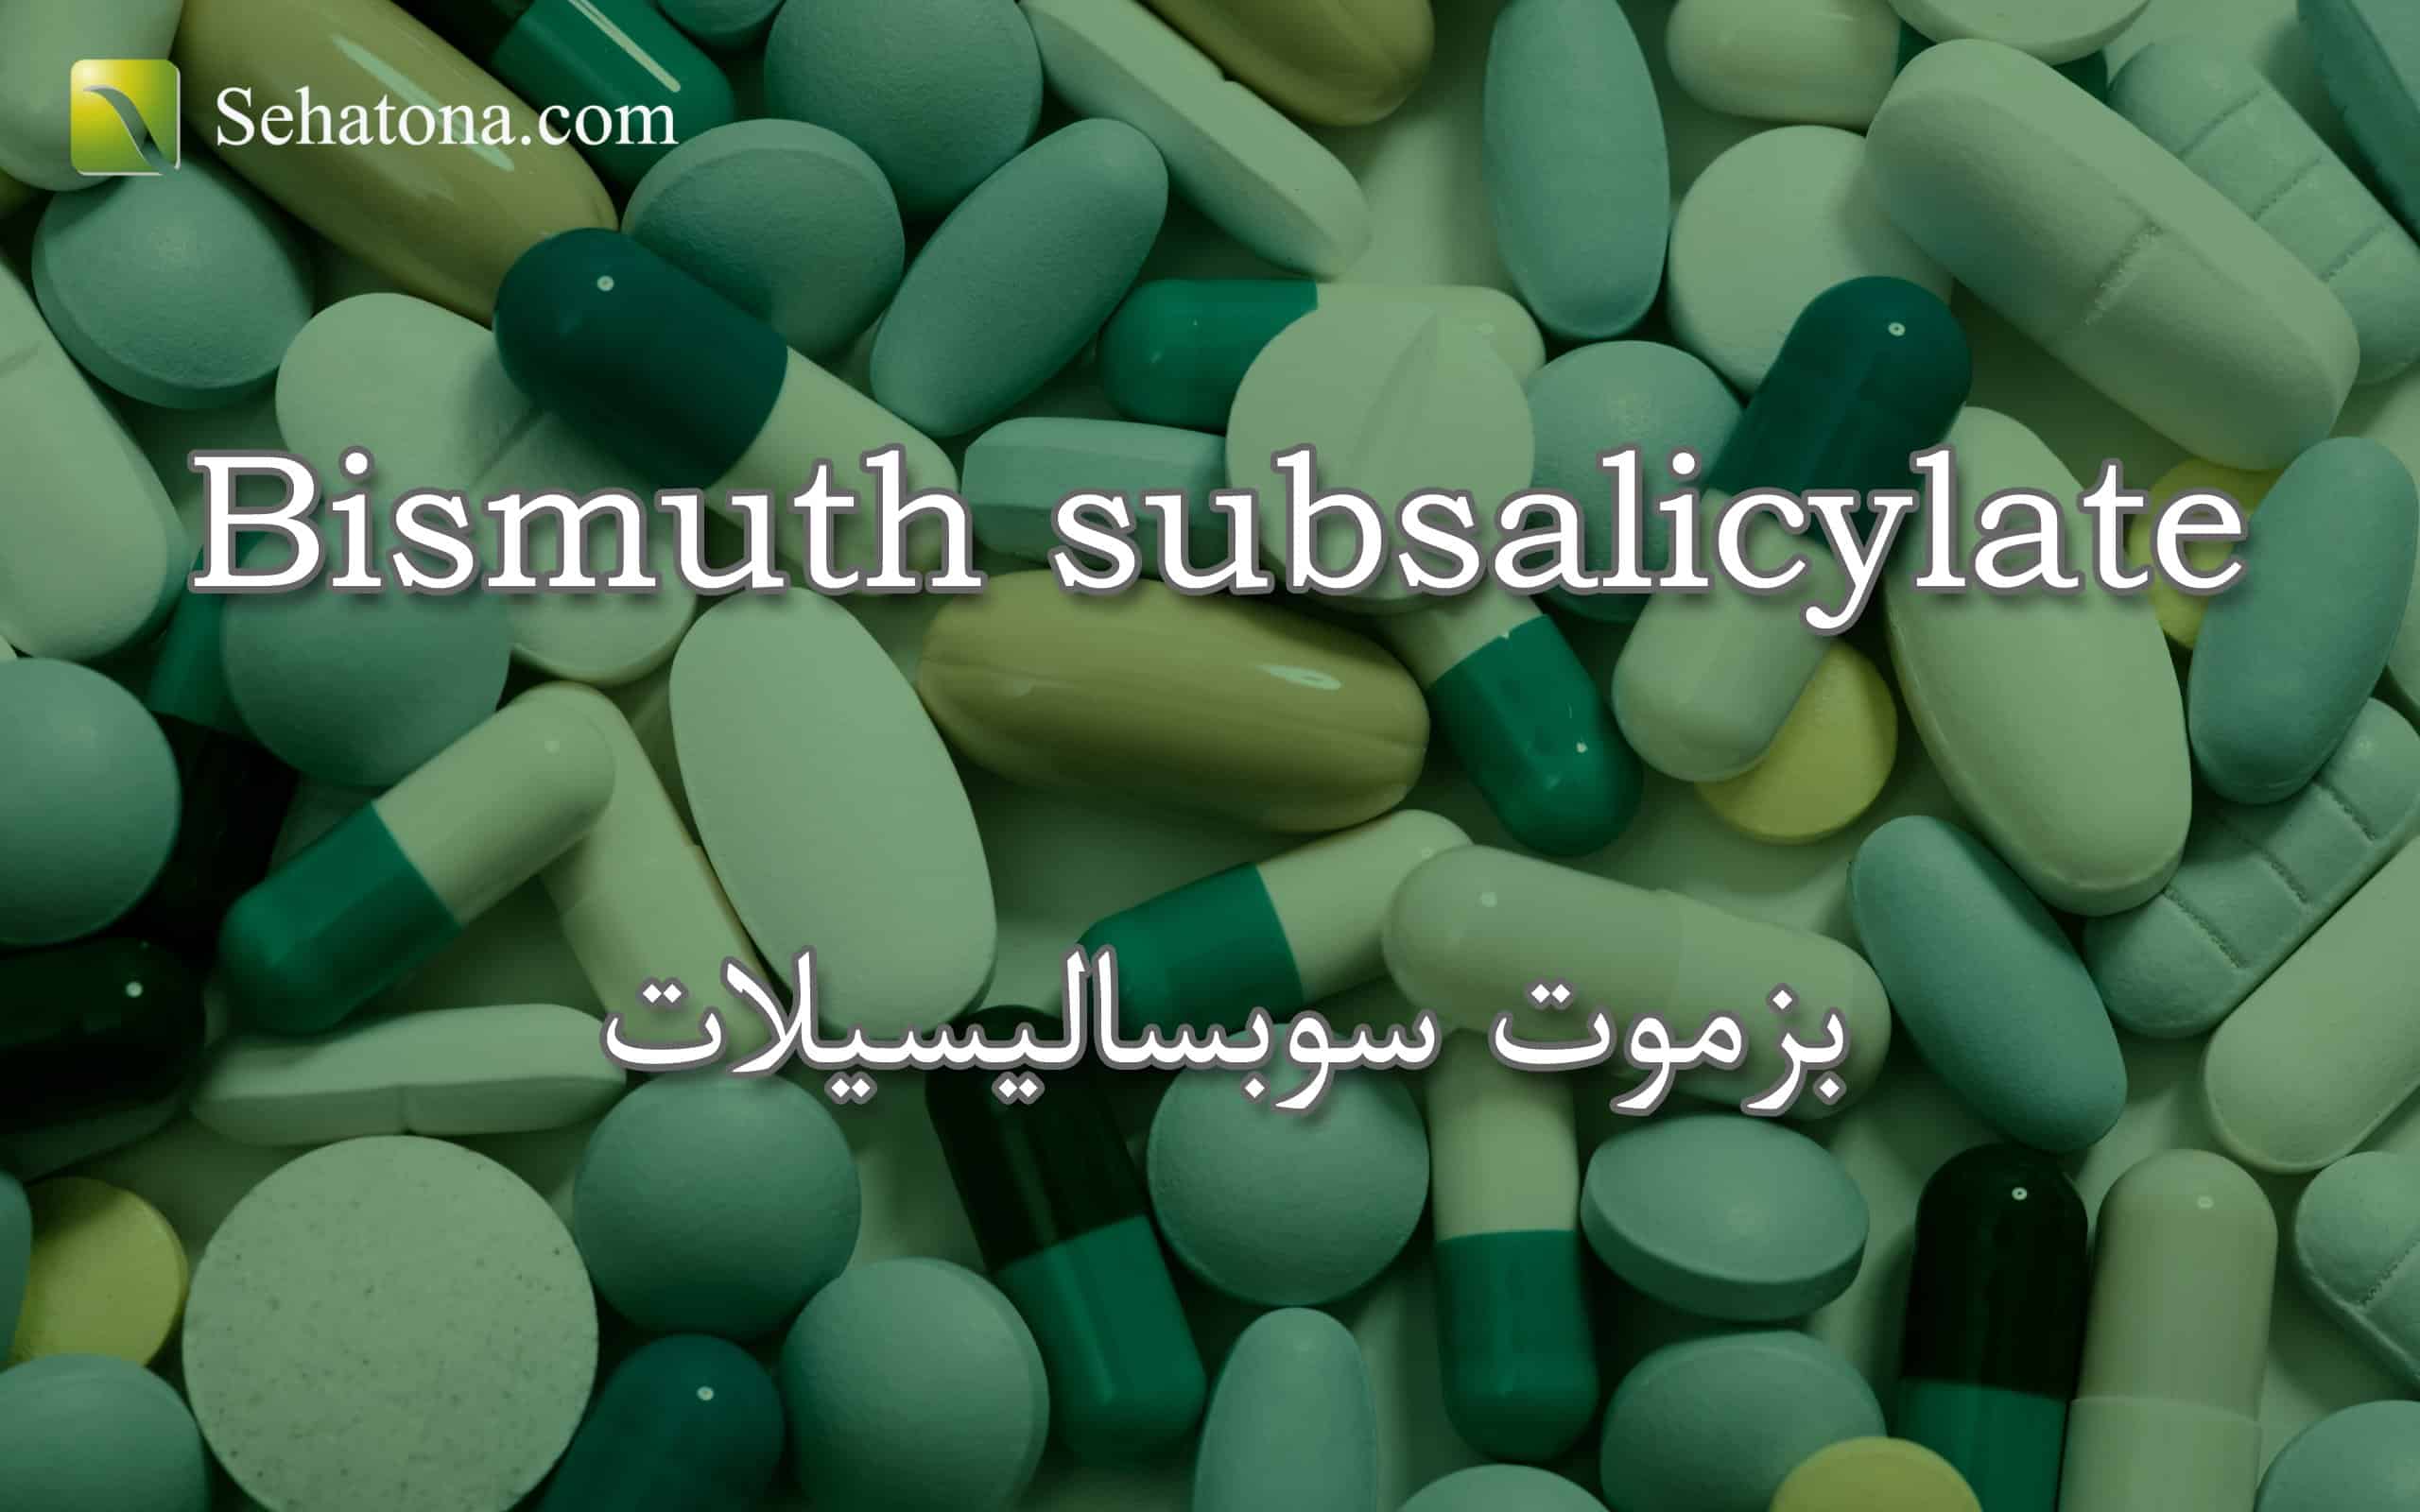 bismuth-subsalicylate